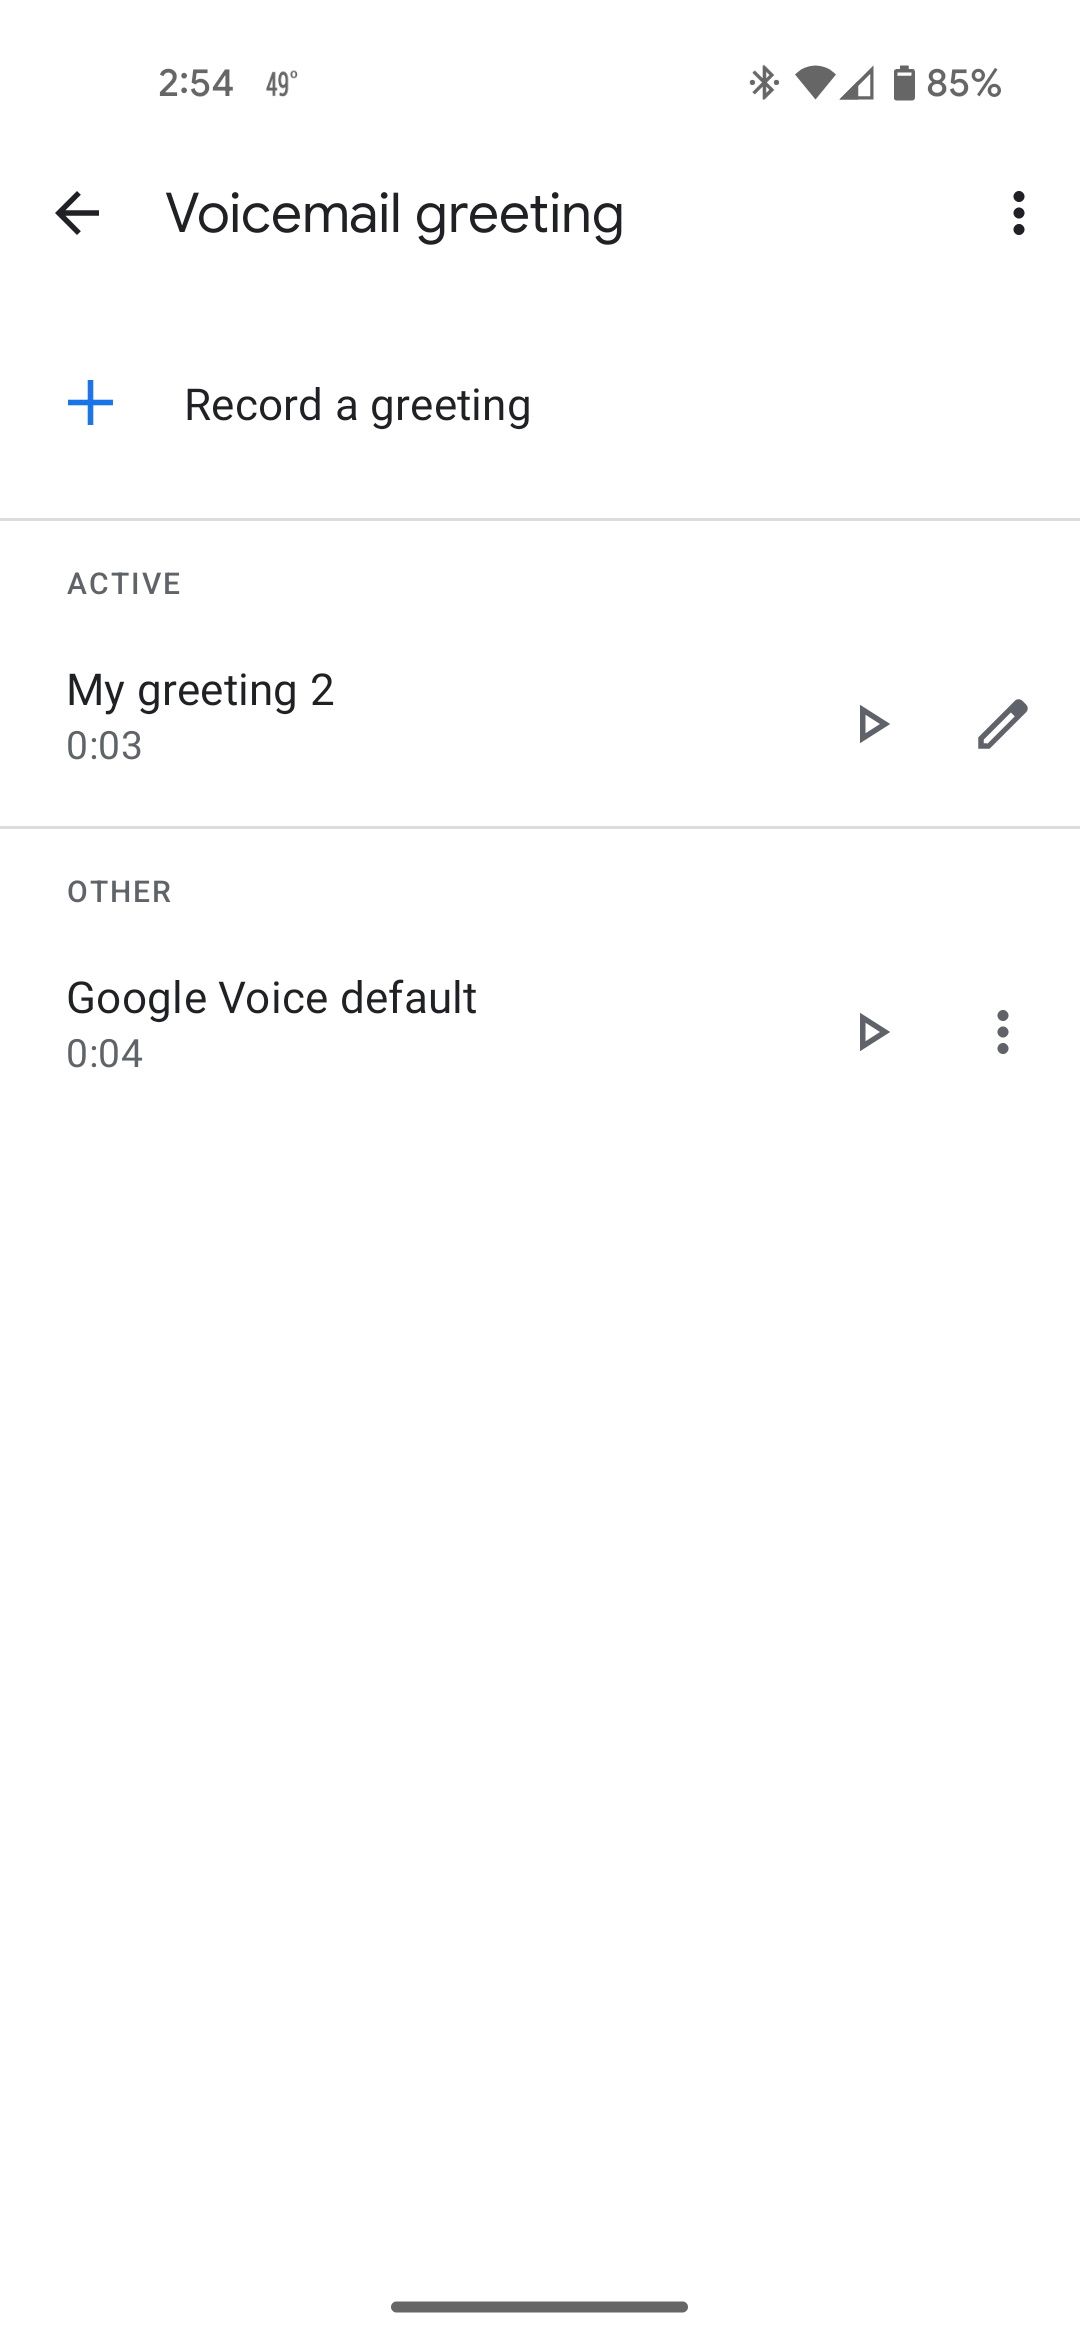 Editing a greeting in Google Voice